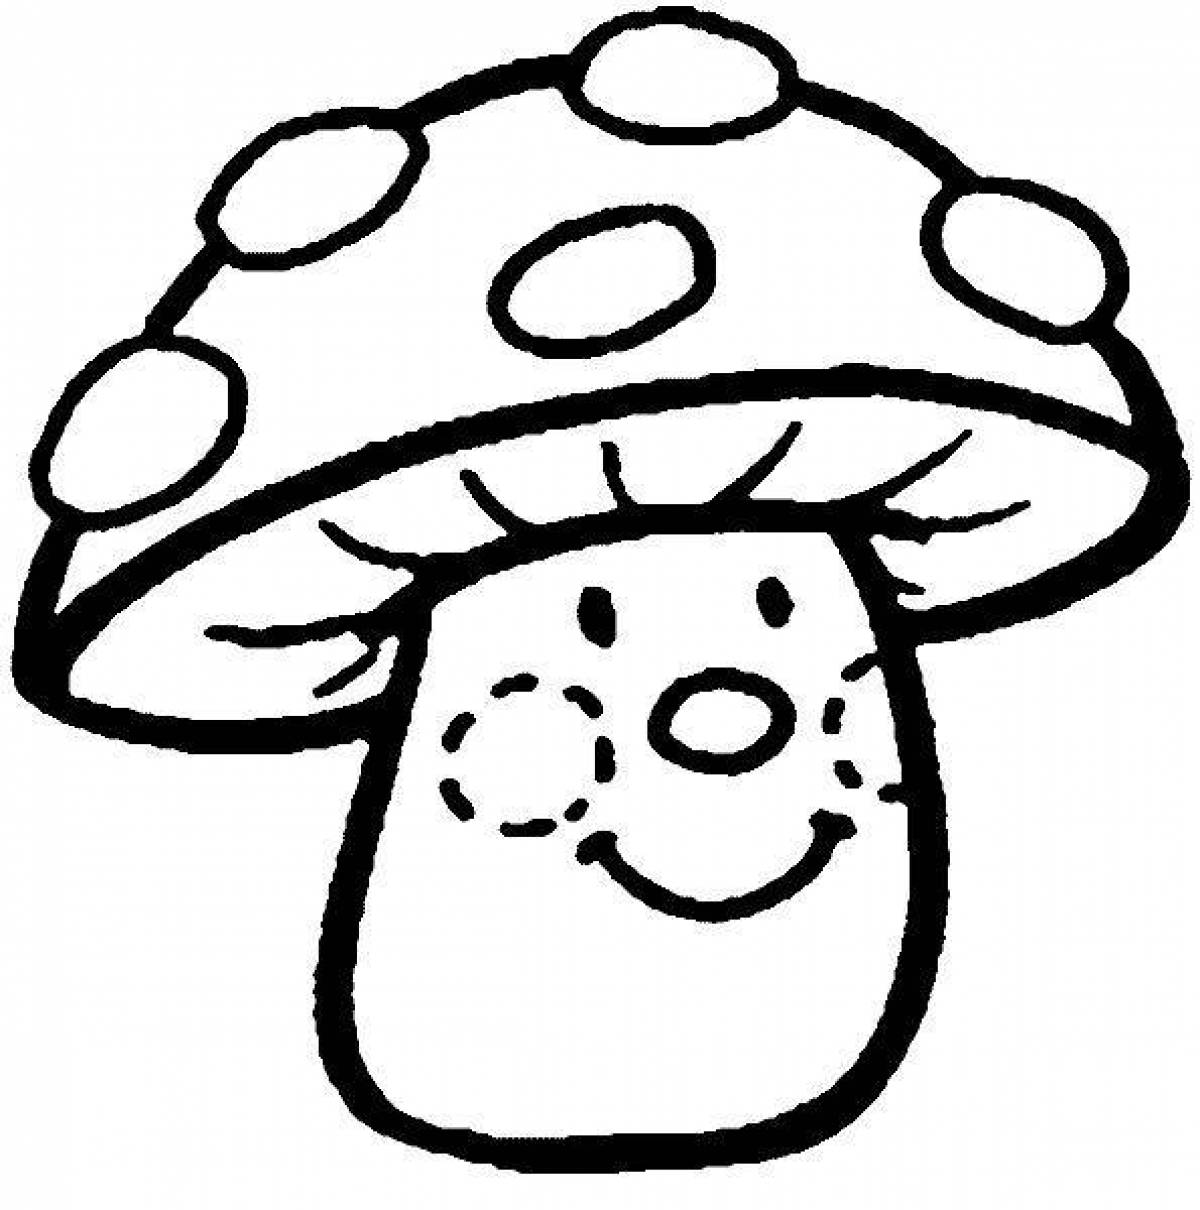 Shining fly agaric coloring book for kids